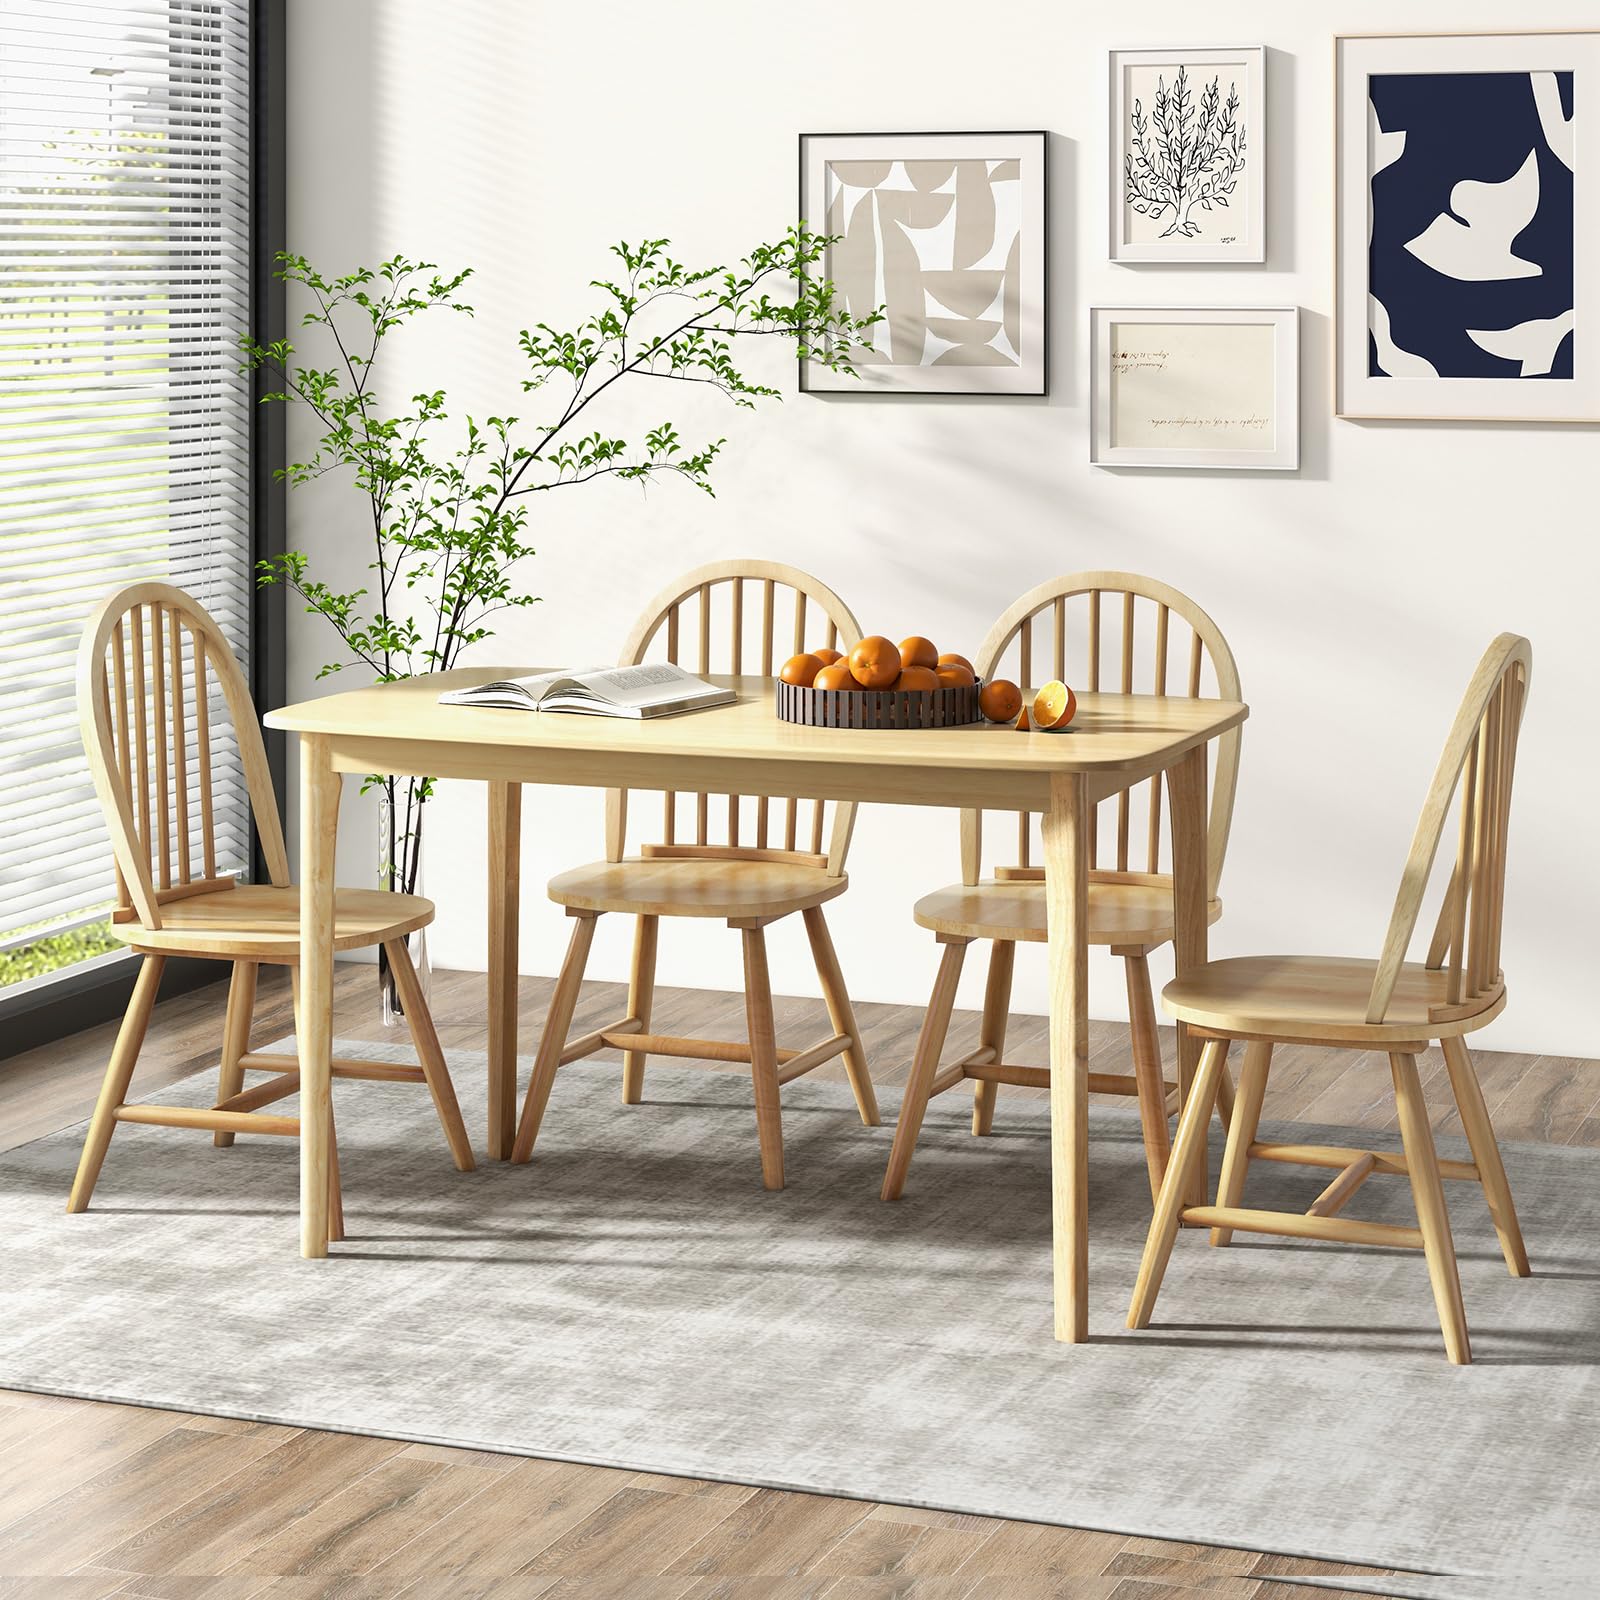 Giantex 48" L Wooden Dining Table Set for 4, 5PCS Rectangular Kitchen Table Set w/Rubber Wood Supporting Legs, Farmhouse Dinner Table & 4 Windsor Chairs for Kitchen Dining Room Small Space